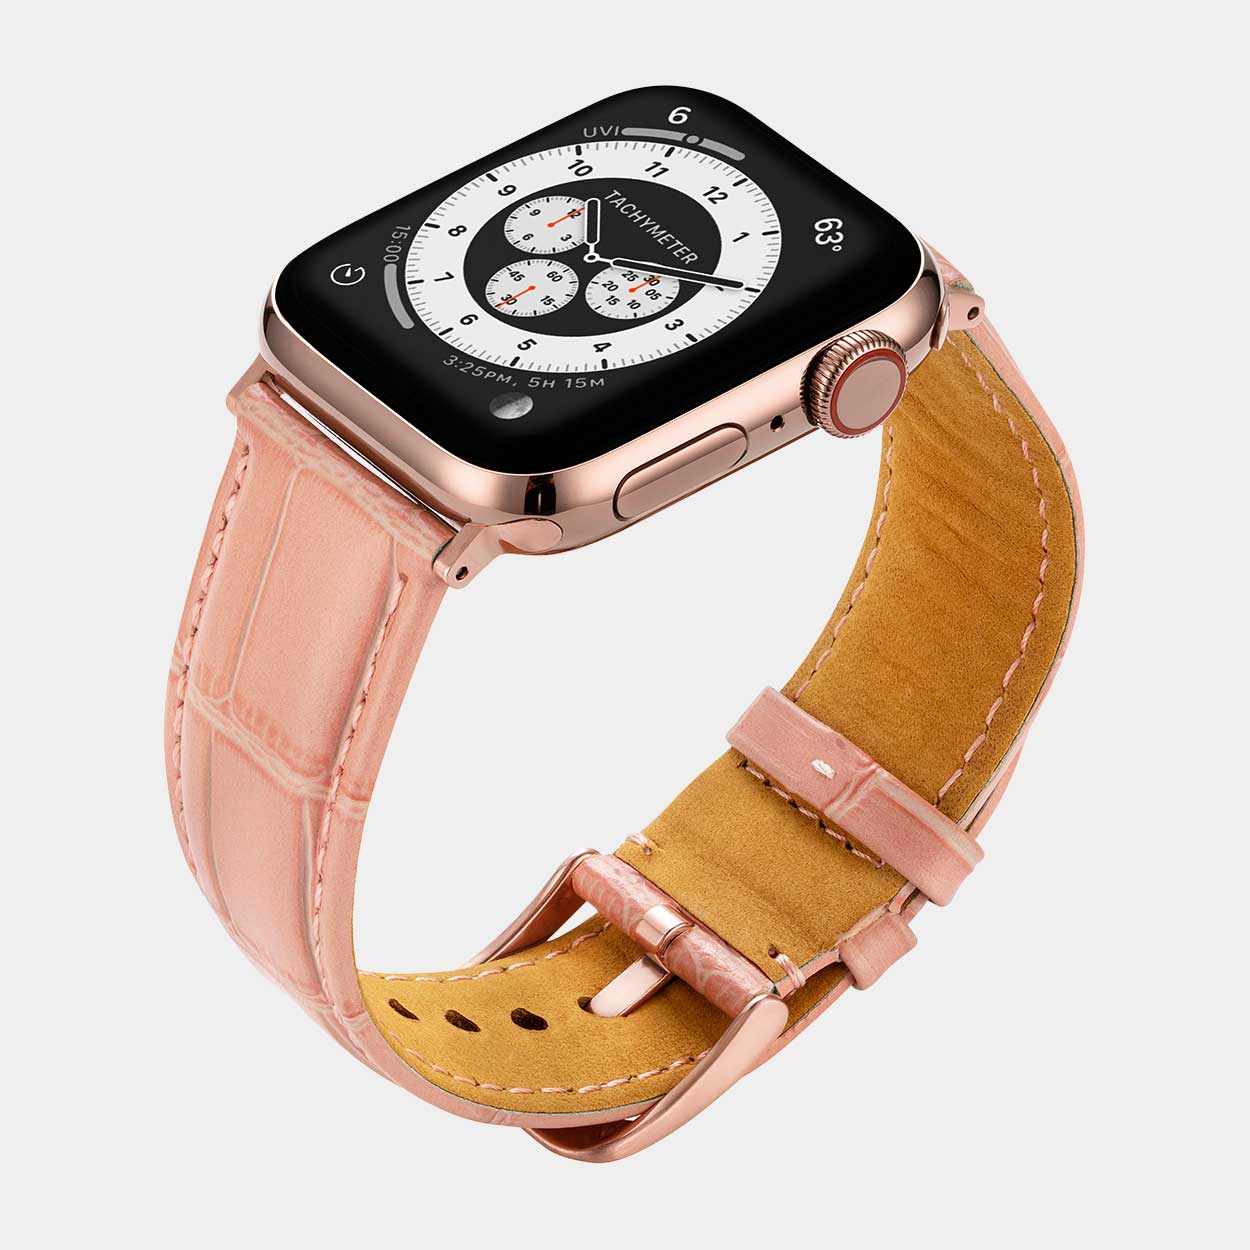 Miam Apple Watch Strap - Pink - Buckle & Band - MIA-38-PIN-RG